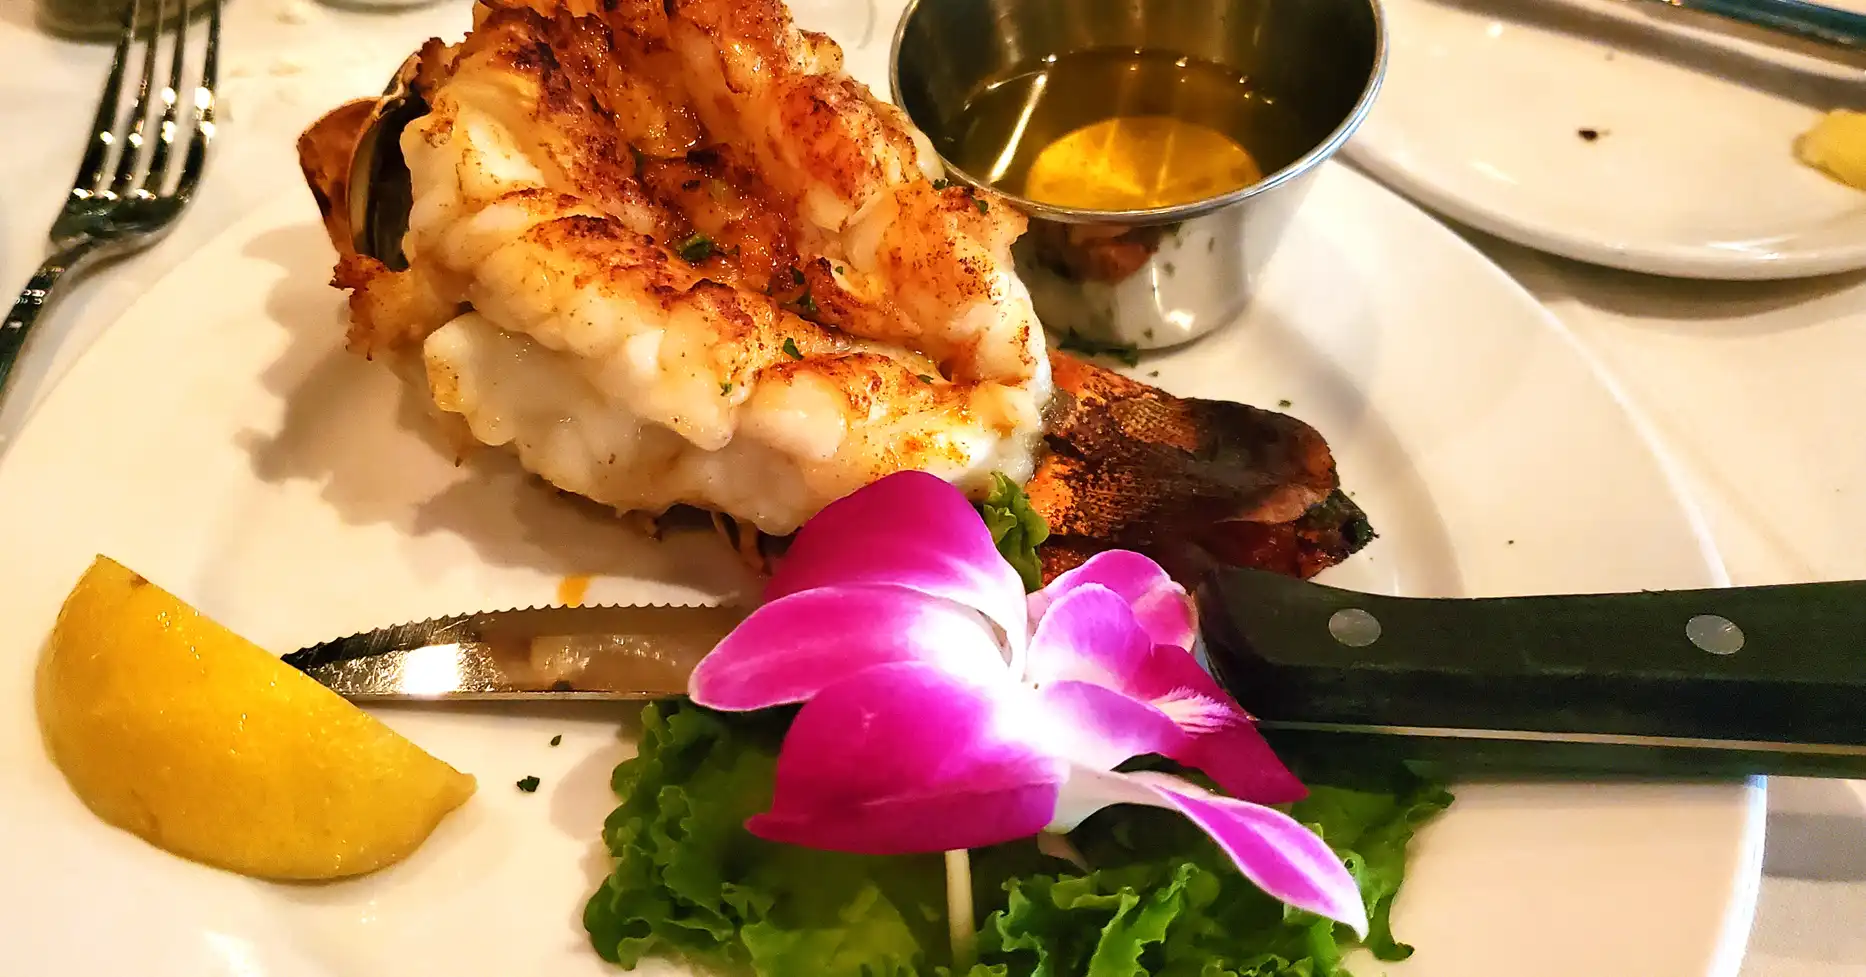 Elegant plate of lobster tail entree on table with beautiful flower as a garnish